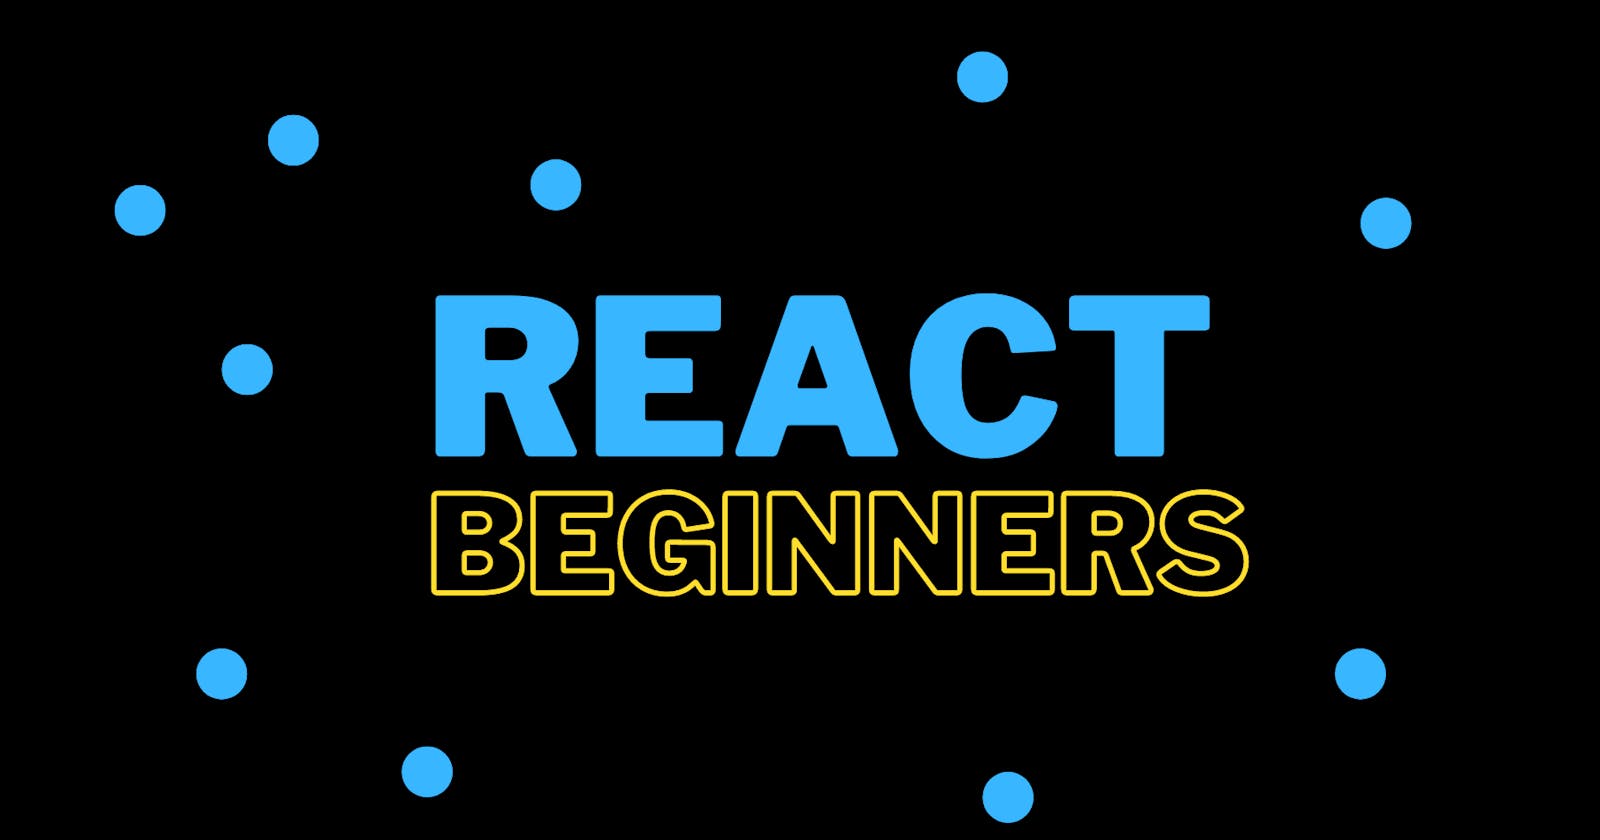 Introduction to React: A Beginner's Guide